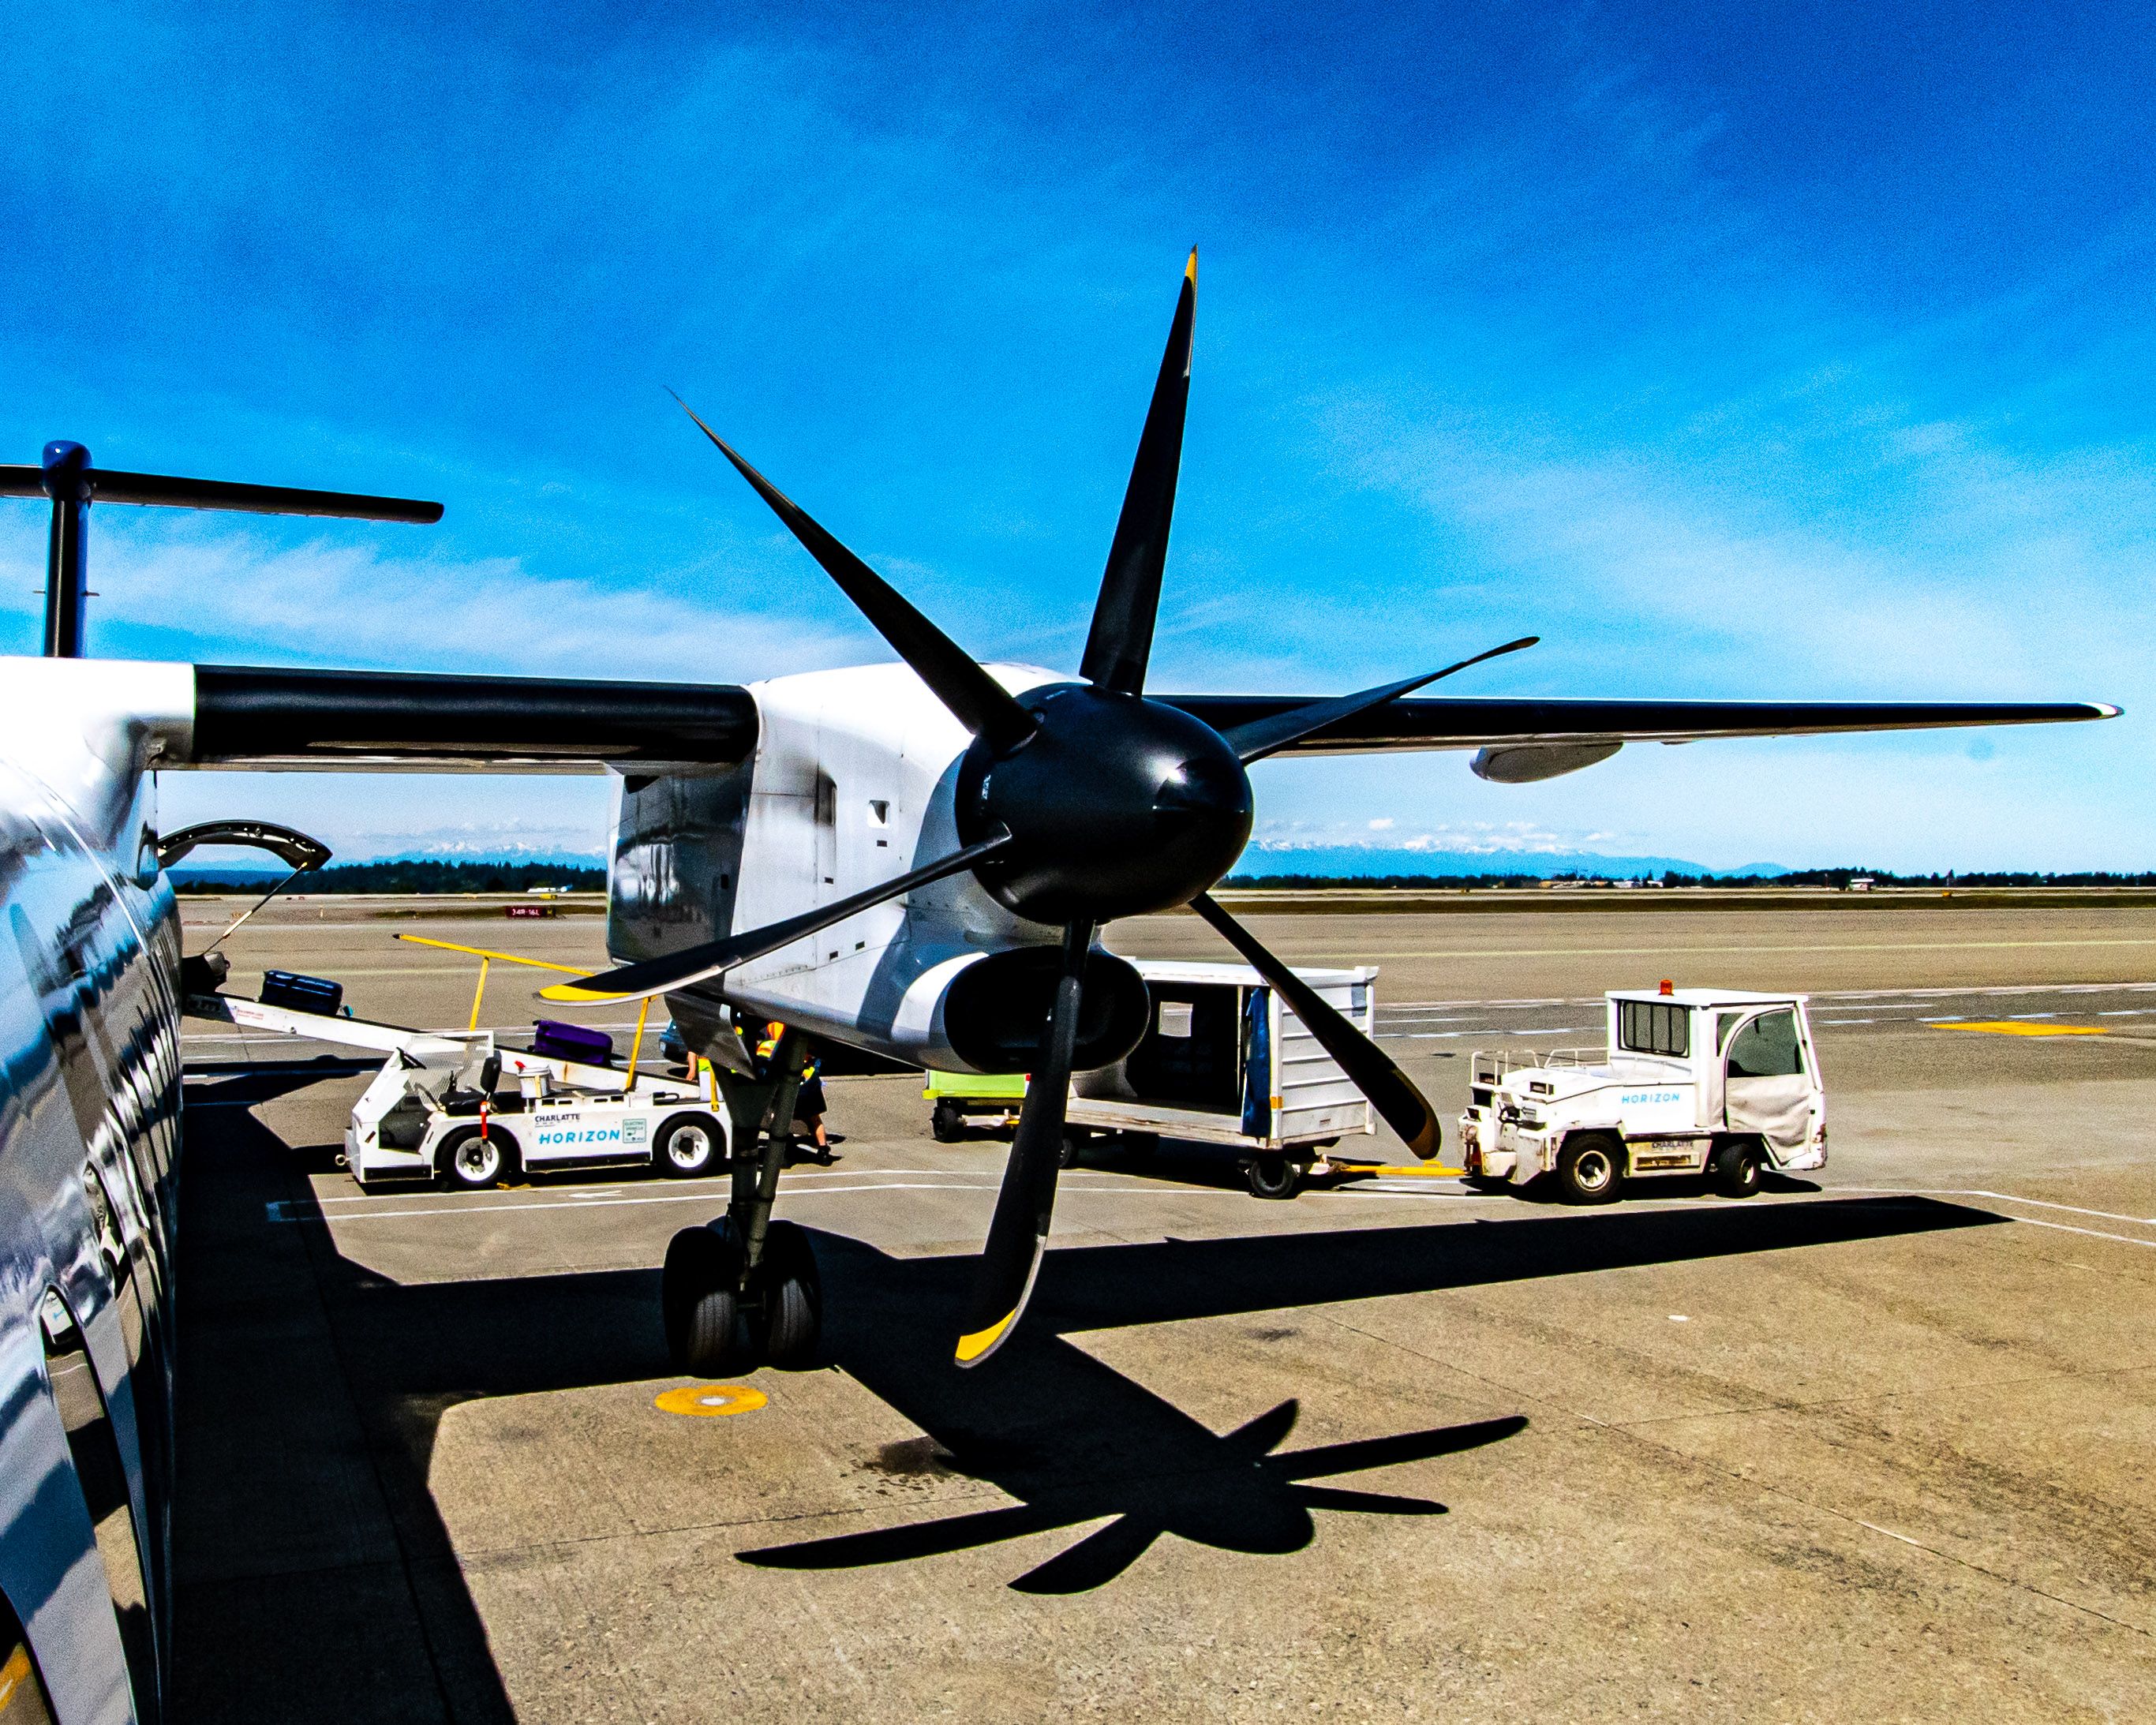 The Big Dowty R408 Prop - A Q400/Dash 8 Propeller attached to a turbine engine, hence a turboprop